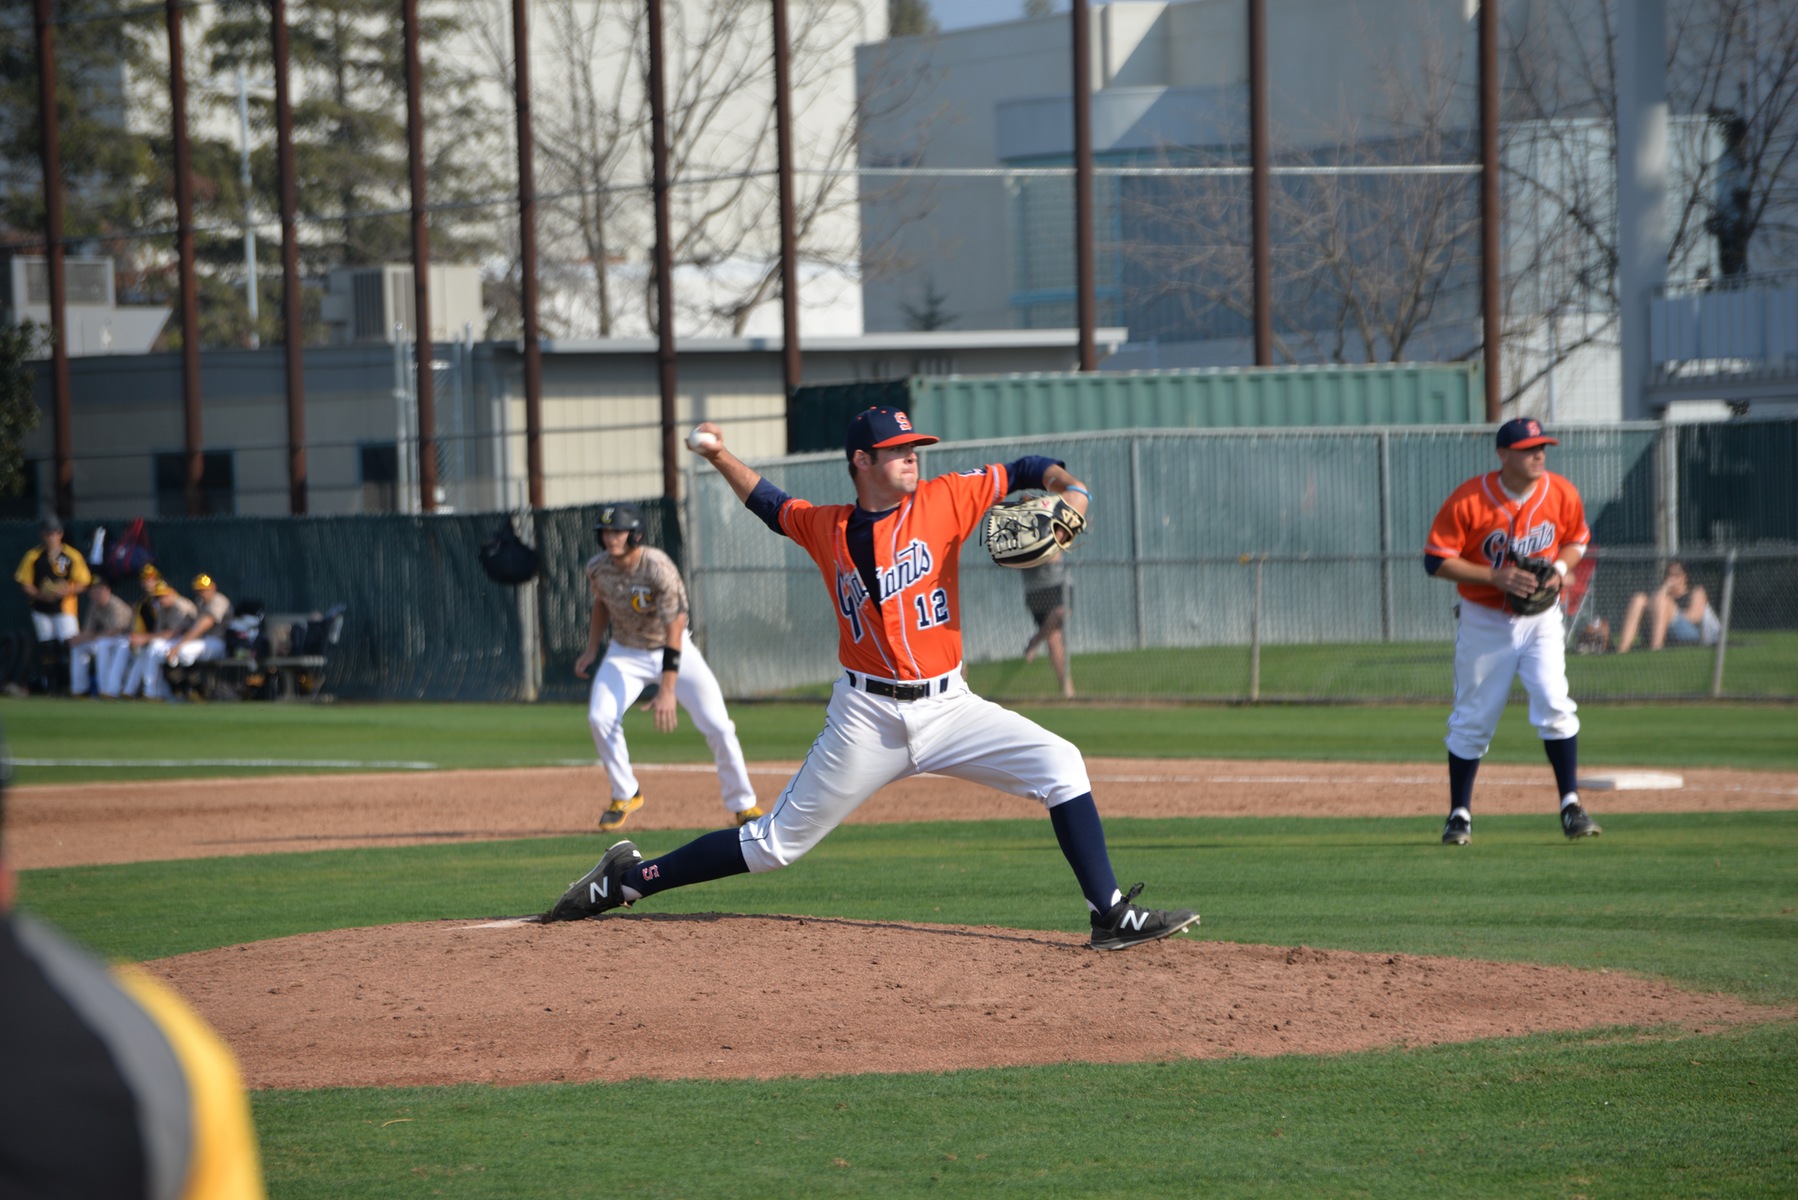 Giants struggle against first place Merced